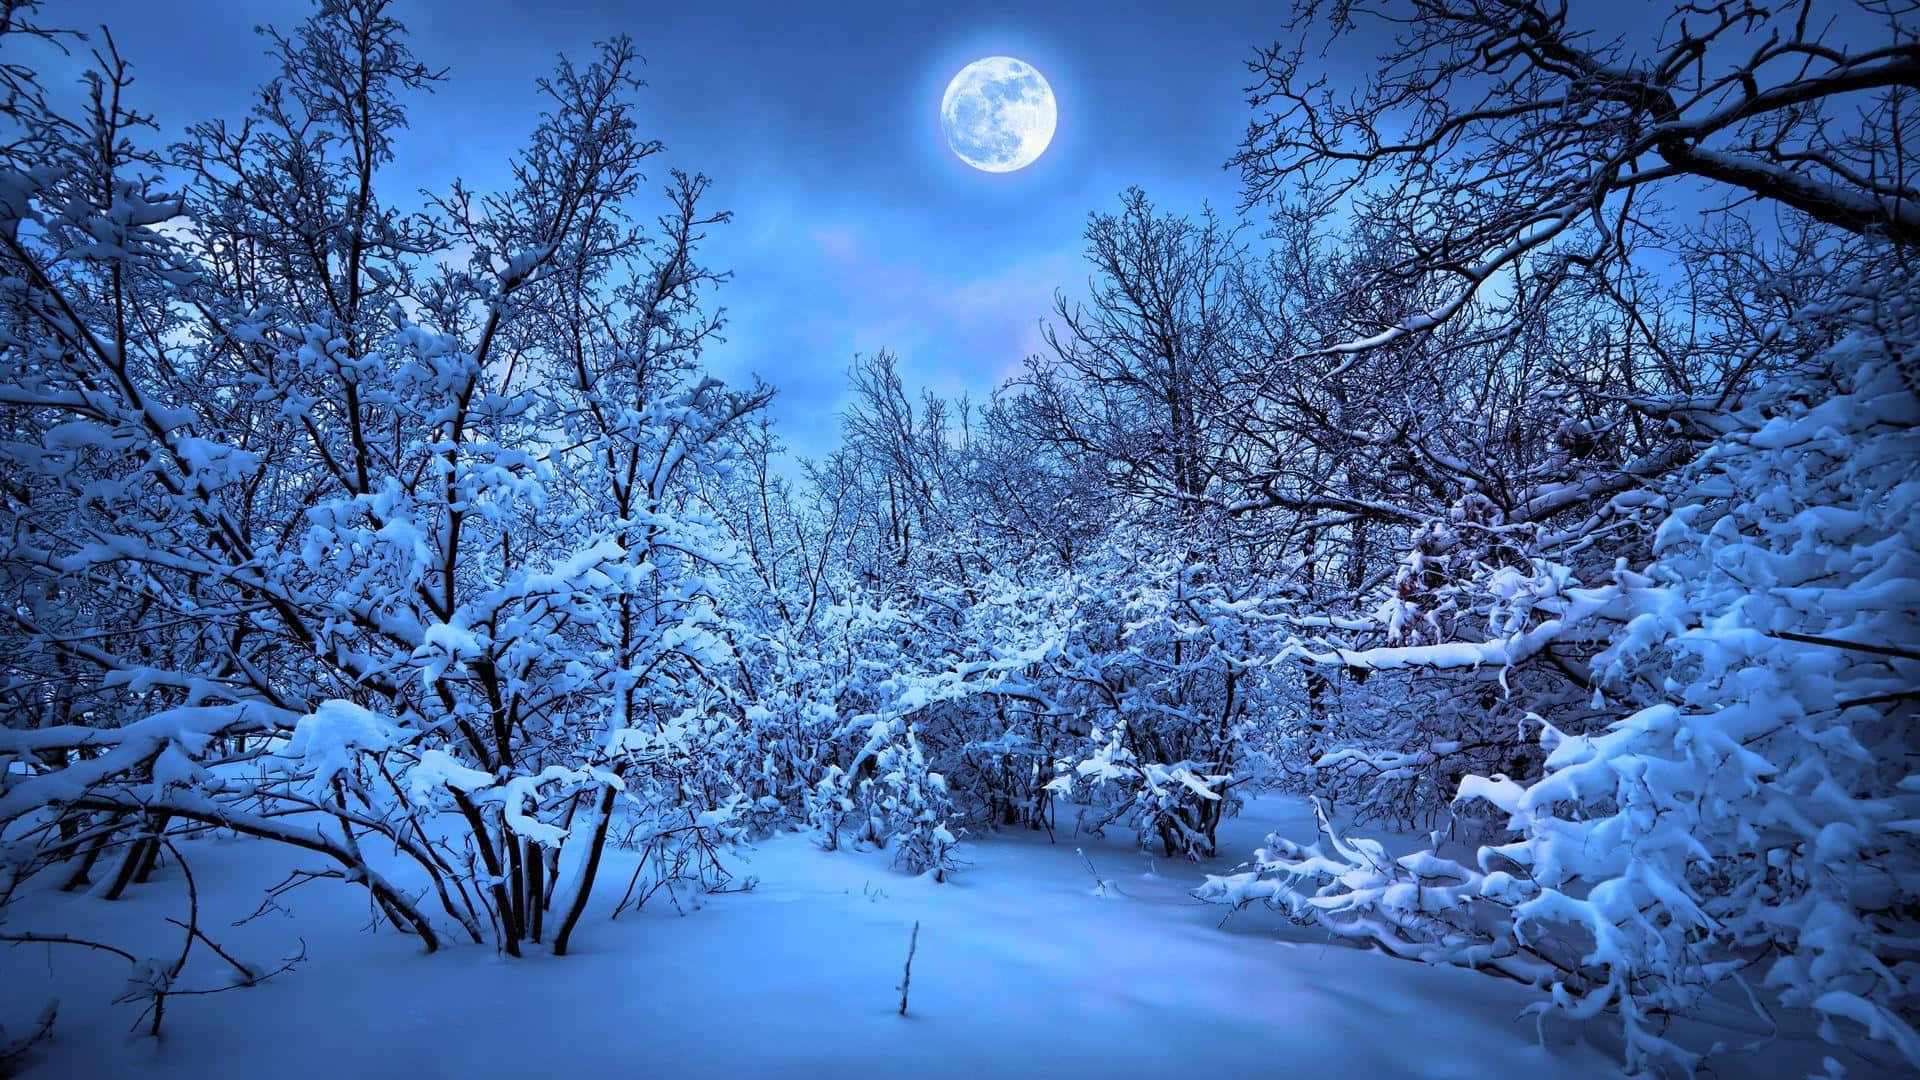 Mystical night in a enchanted forest Wallpaper